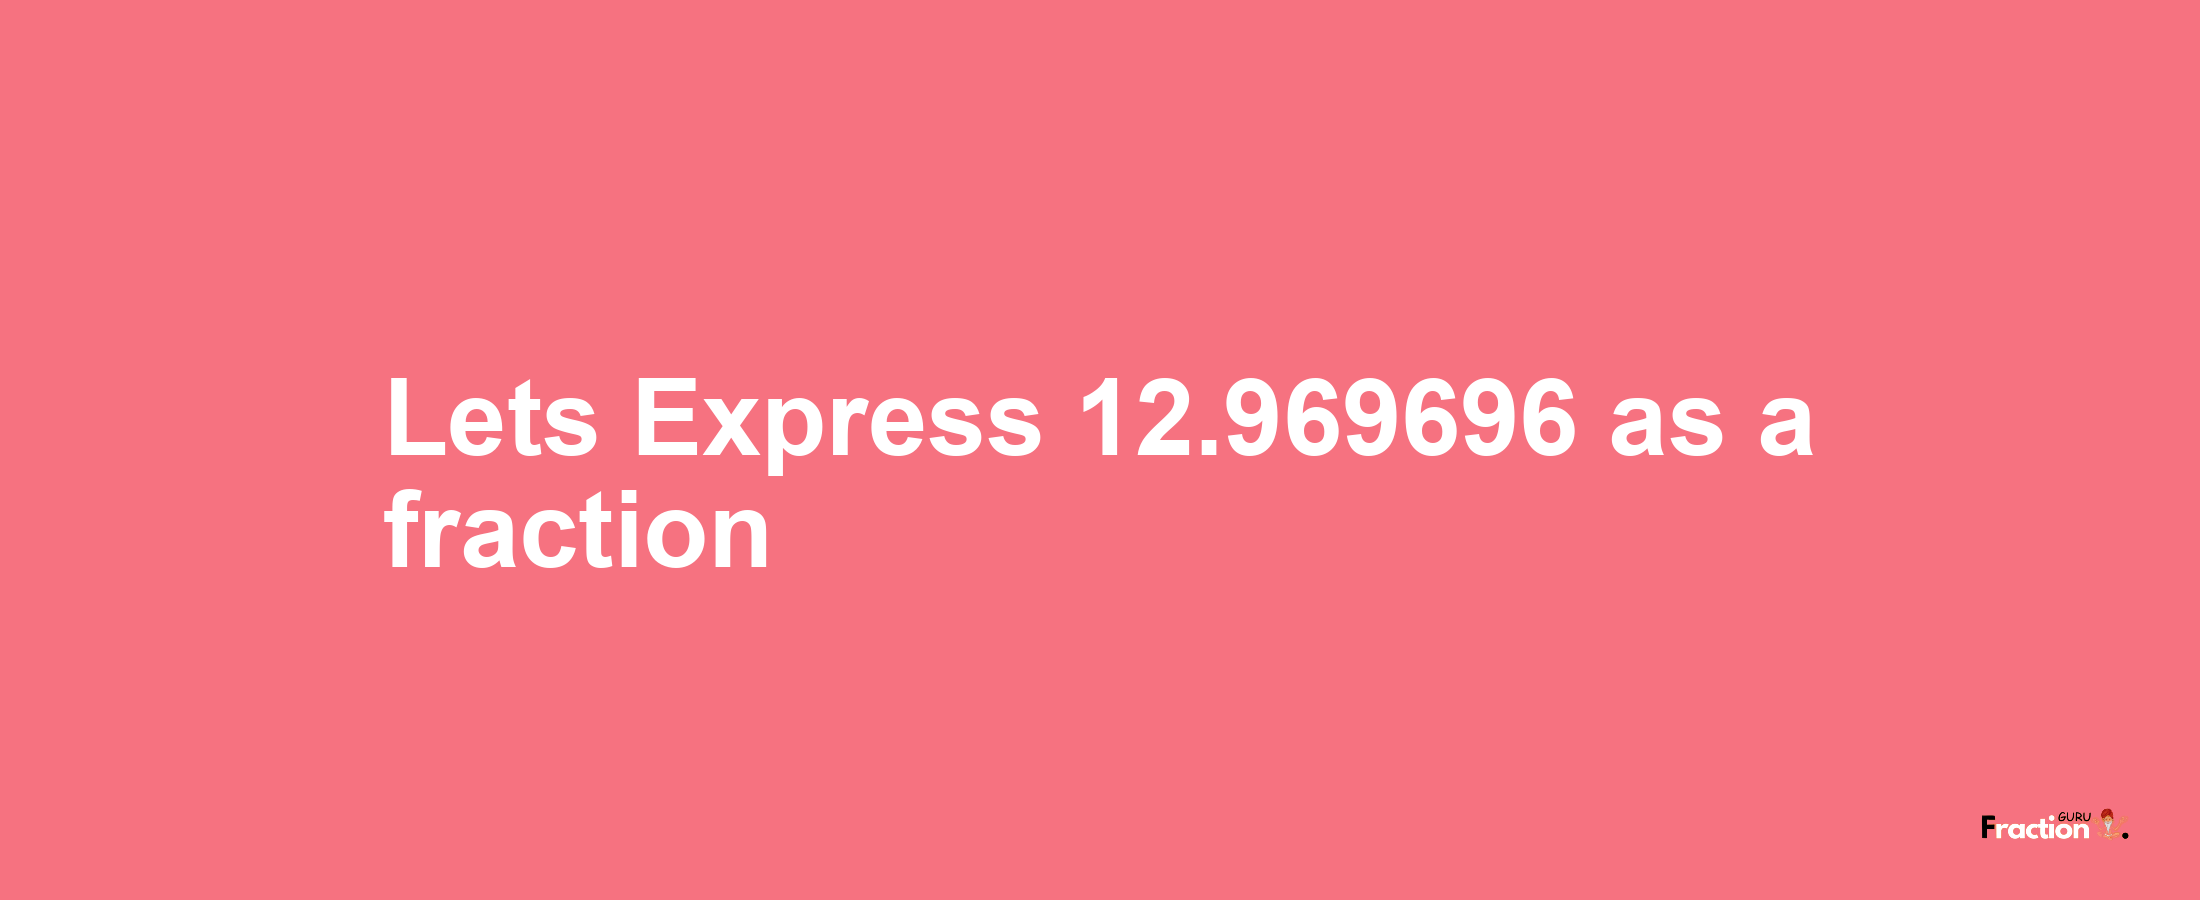 Lets Express 12.969696 as afraction